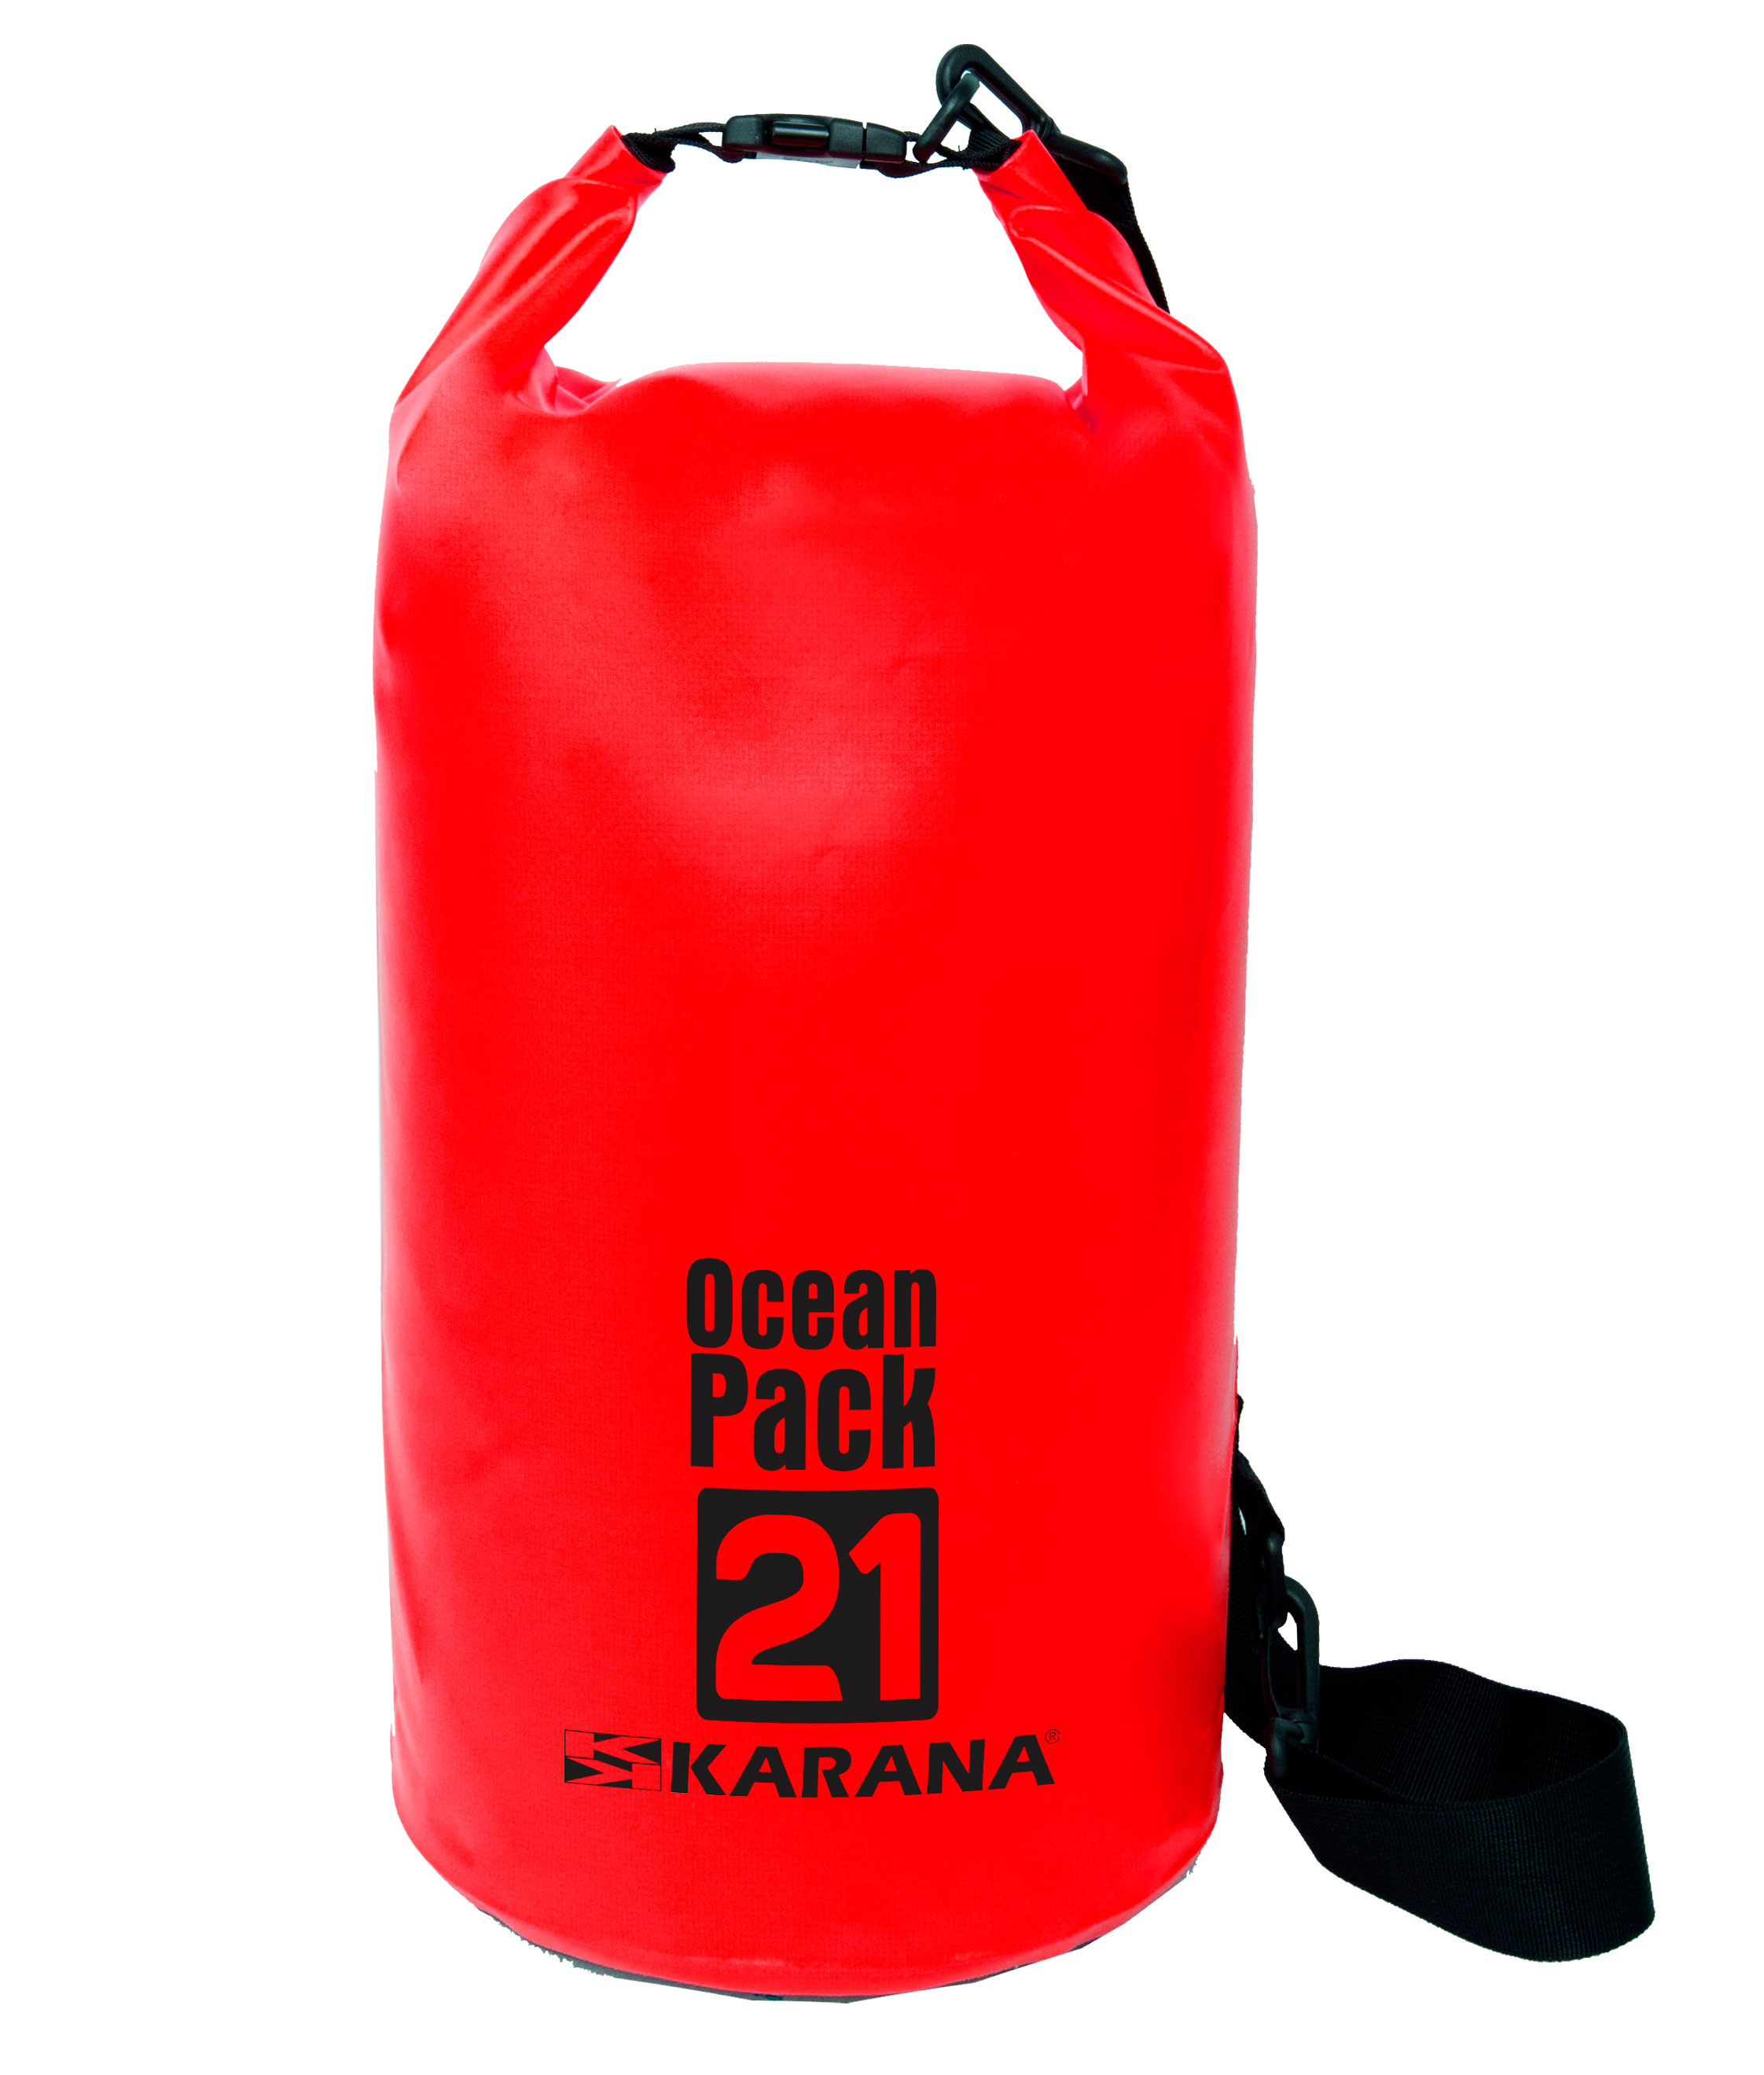 Multicolor Polyester Ocean Pack bag - 2 Liter at Rs 210/piece in Surat |  ID: 2849951023762